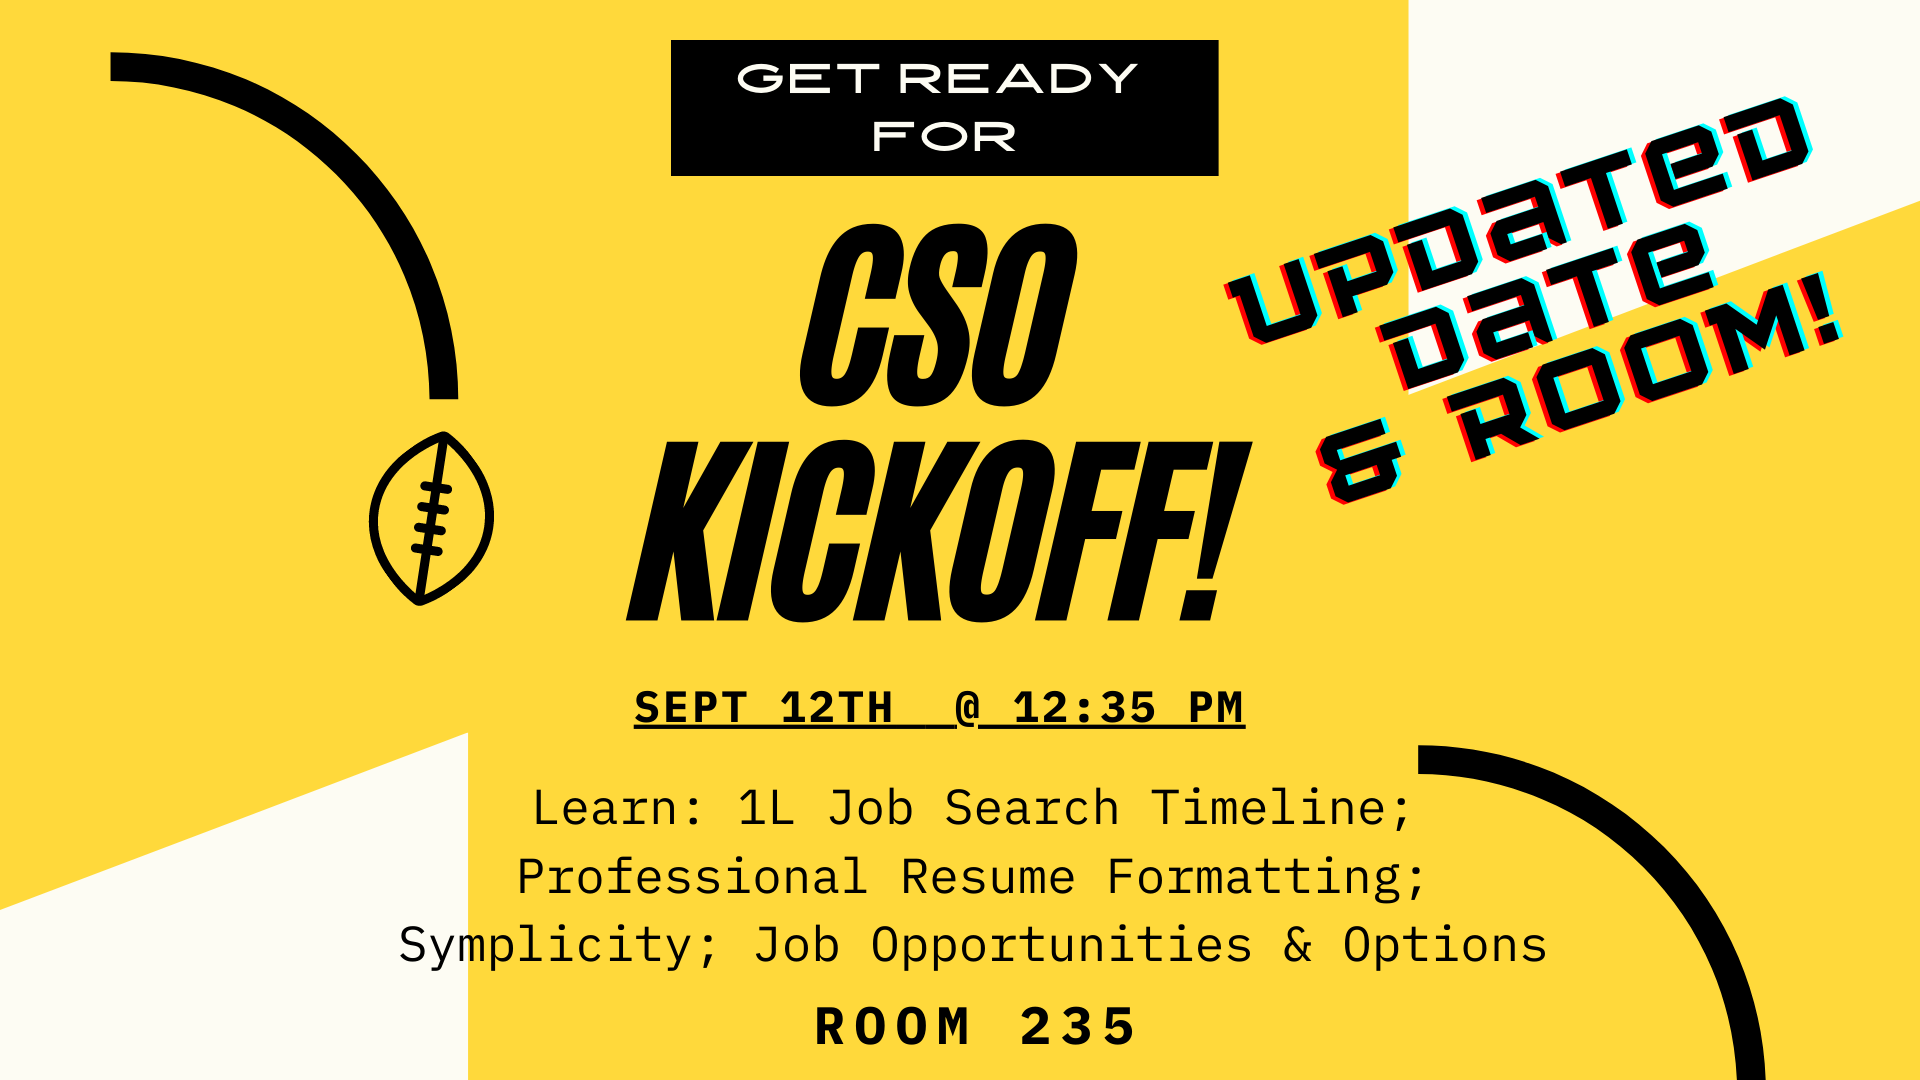 Get Ready for the    CSO Kickoff!    Sept 6th @ 12:35 pm    Learn: 1L Job Search Timeline; Professional Resume Formatting; Symplicity; Job Opportunities & Options    Levitt Auditorium